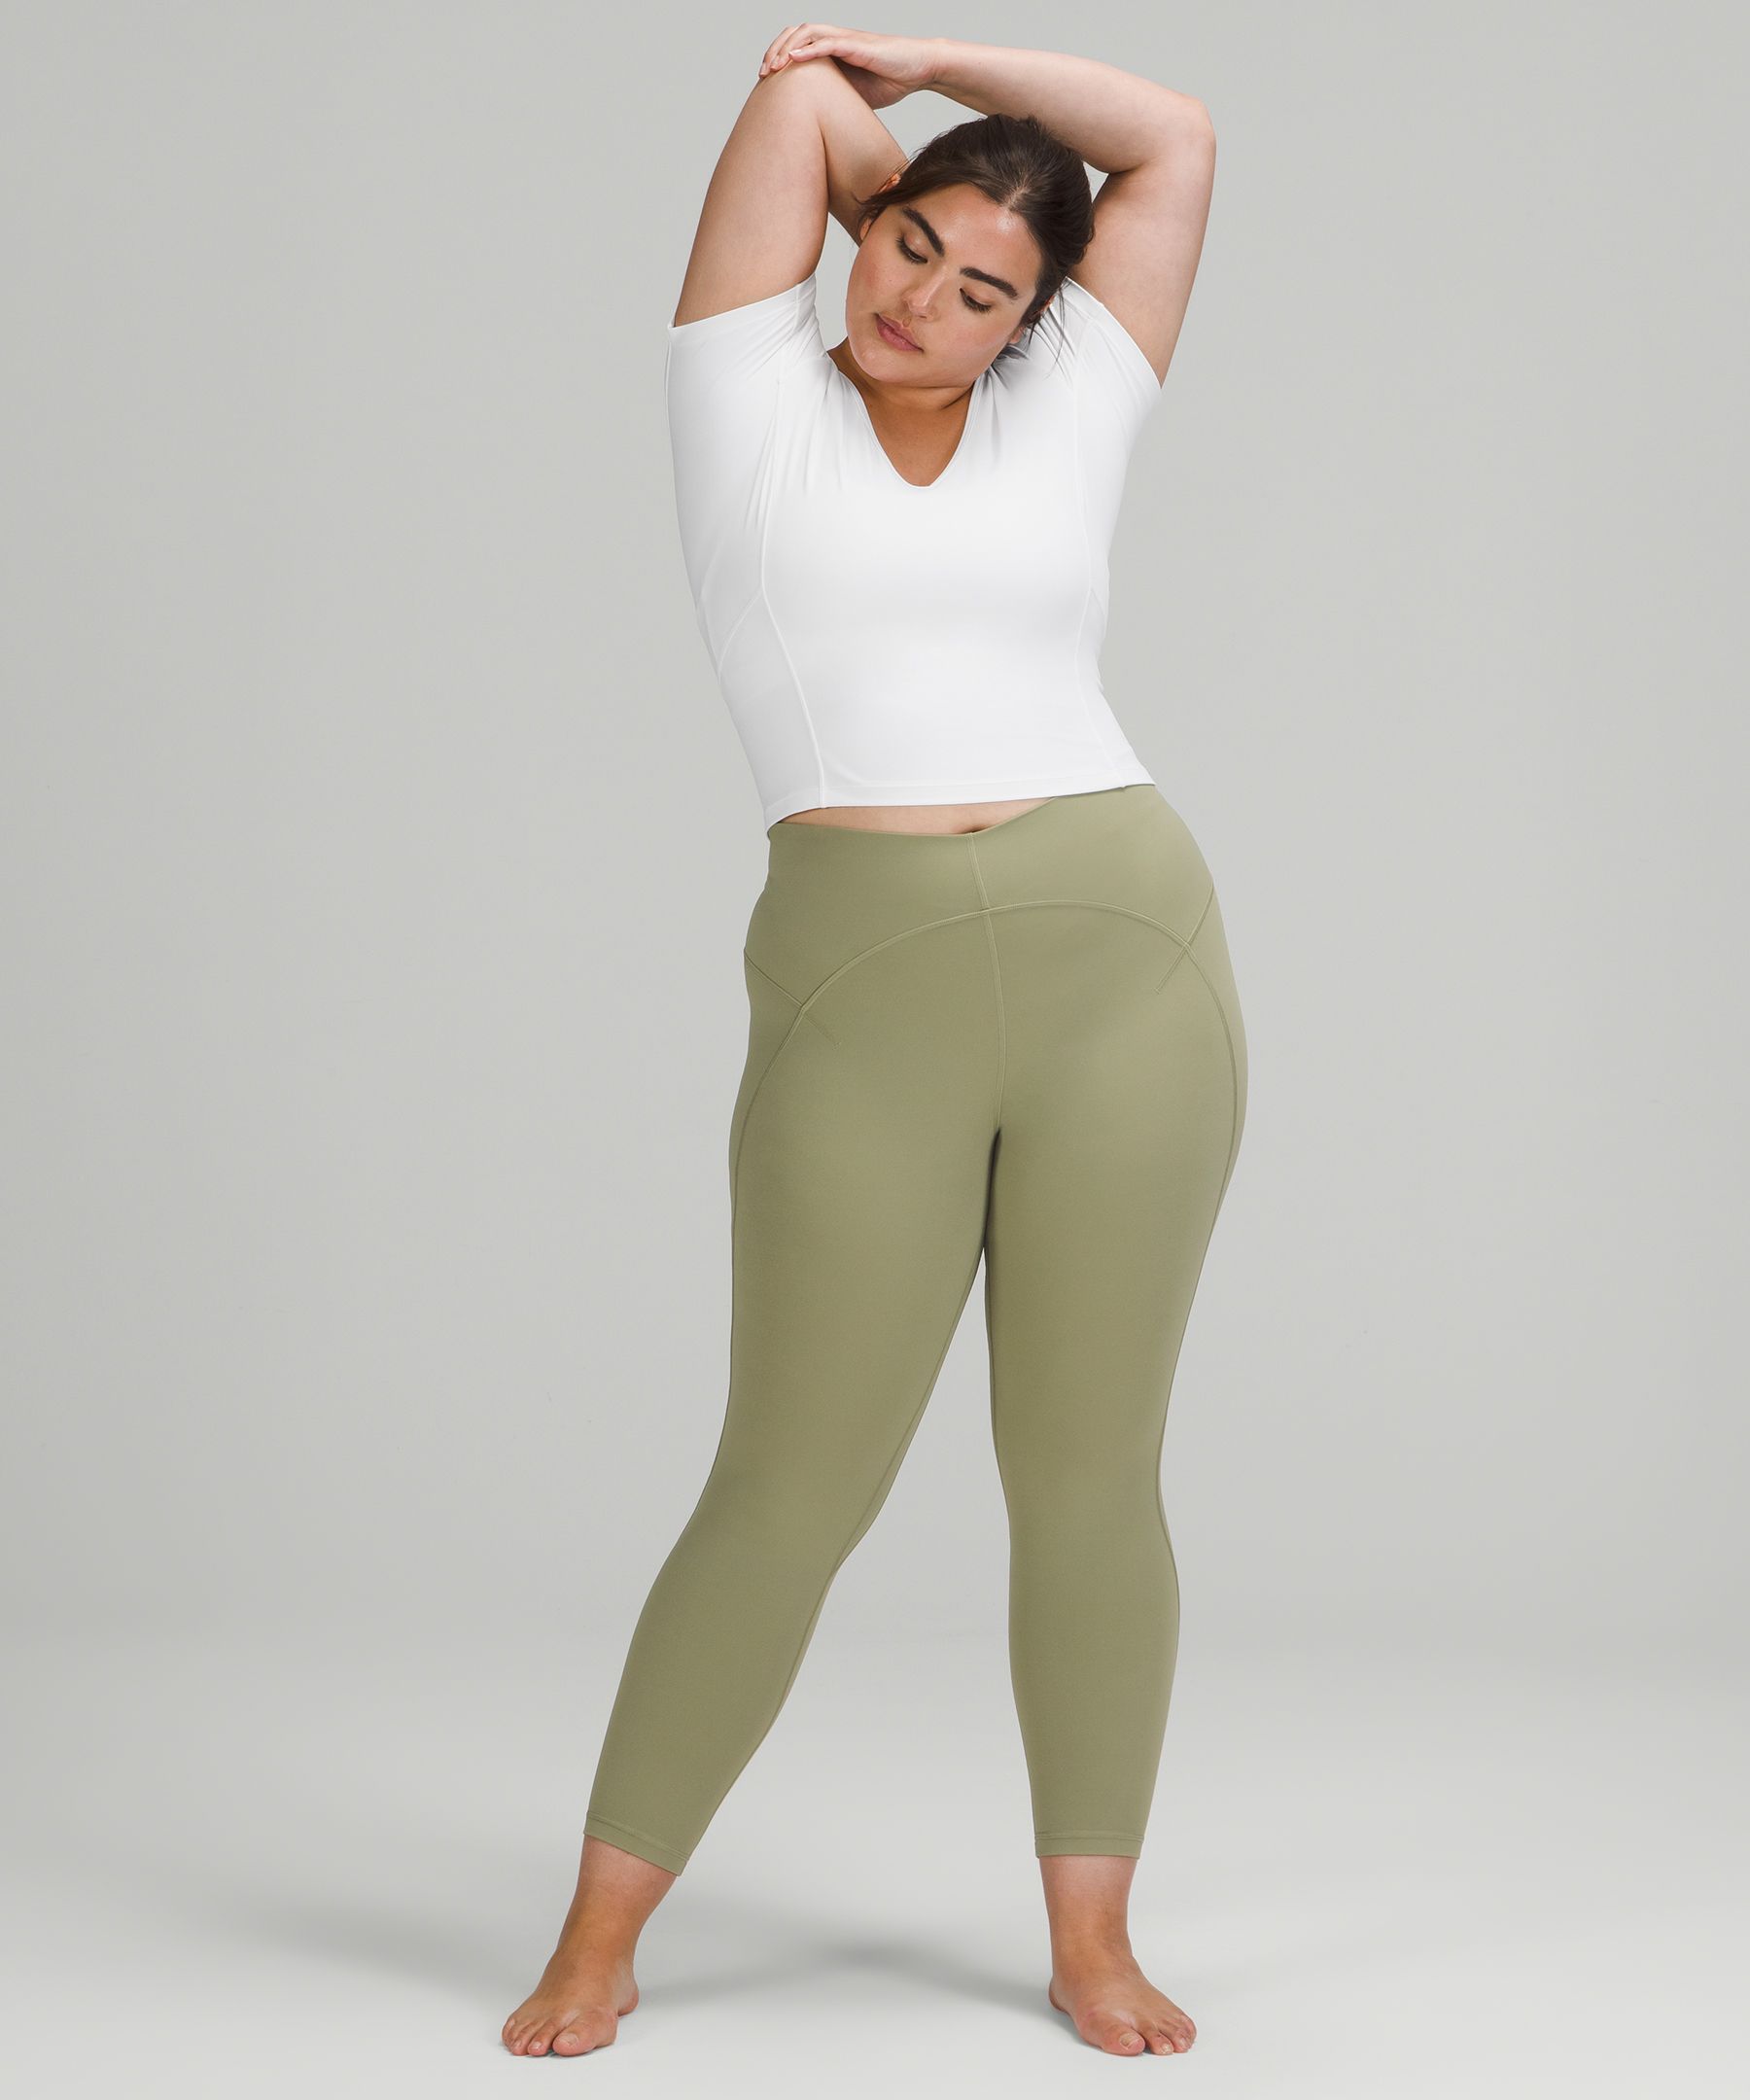 Womens High Waist Nulu Cropped Slim Yoga LU 55 Oversized Five Point Fitness  Gym Capris For Biking, Golf, And Tennis From Luyogastar, $18.82